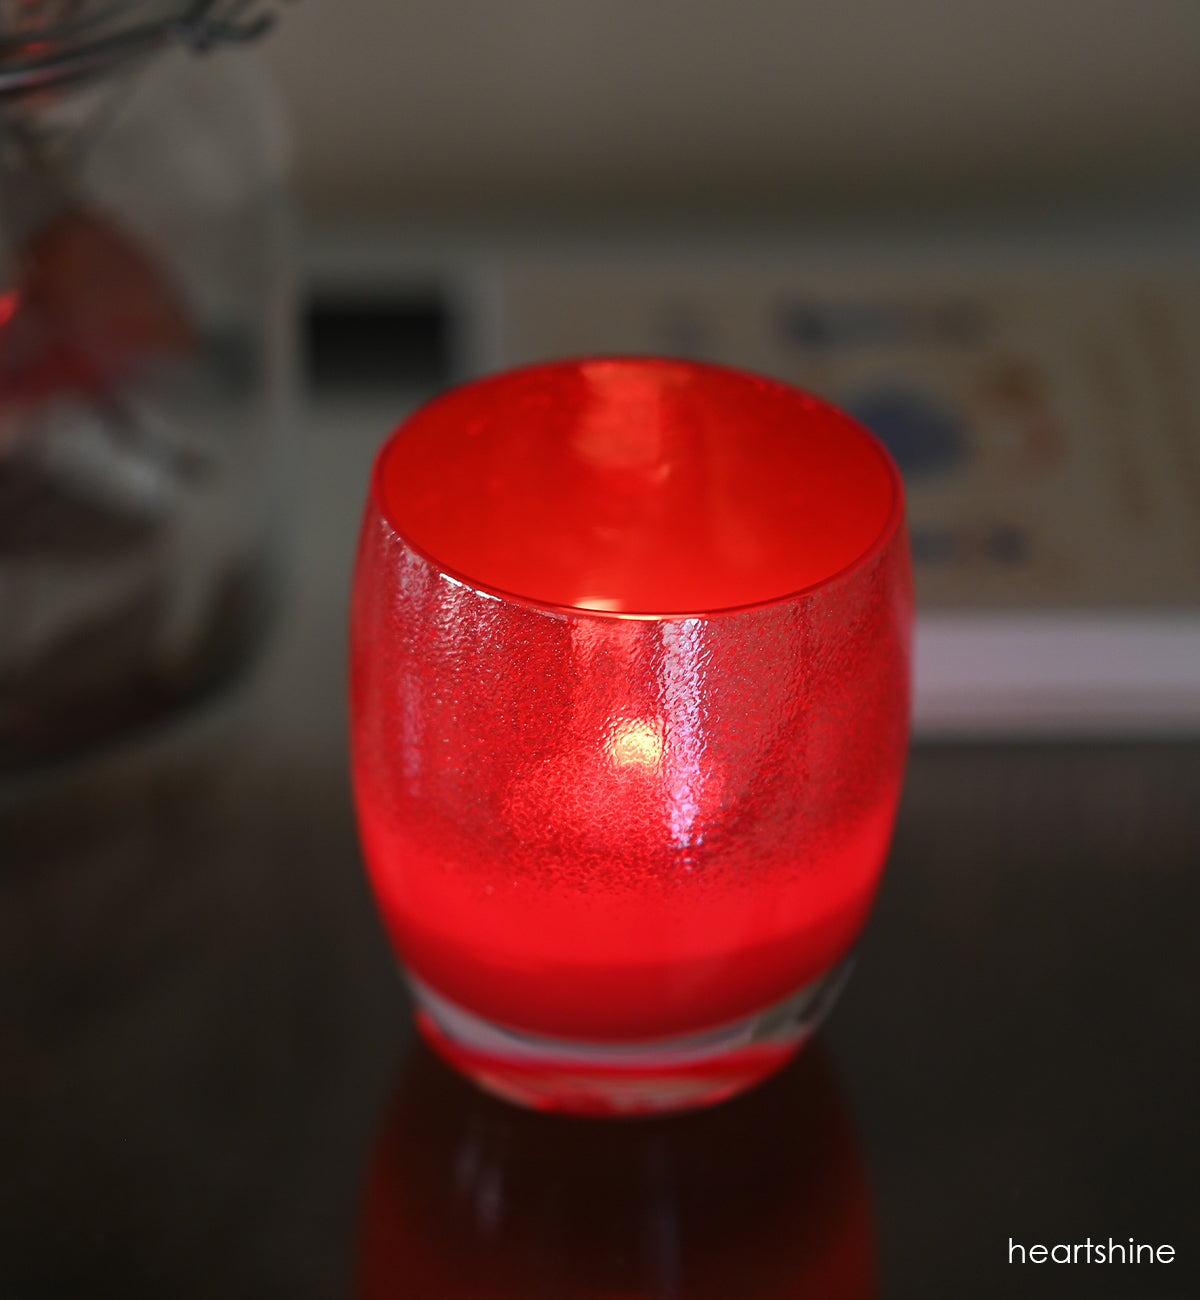 heartshine has a shimmering glitter that enrobes the top of a bright red base on this beautiful hand-blown candle holder.